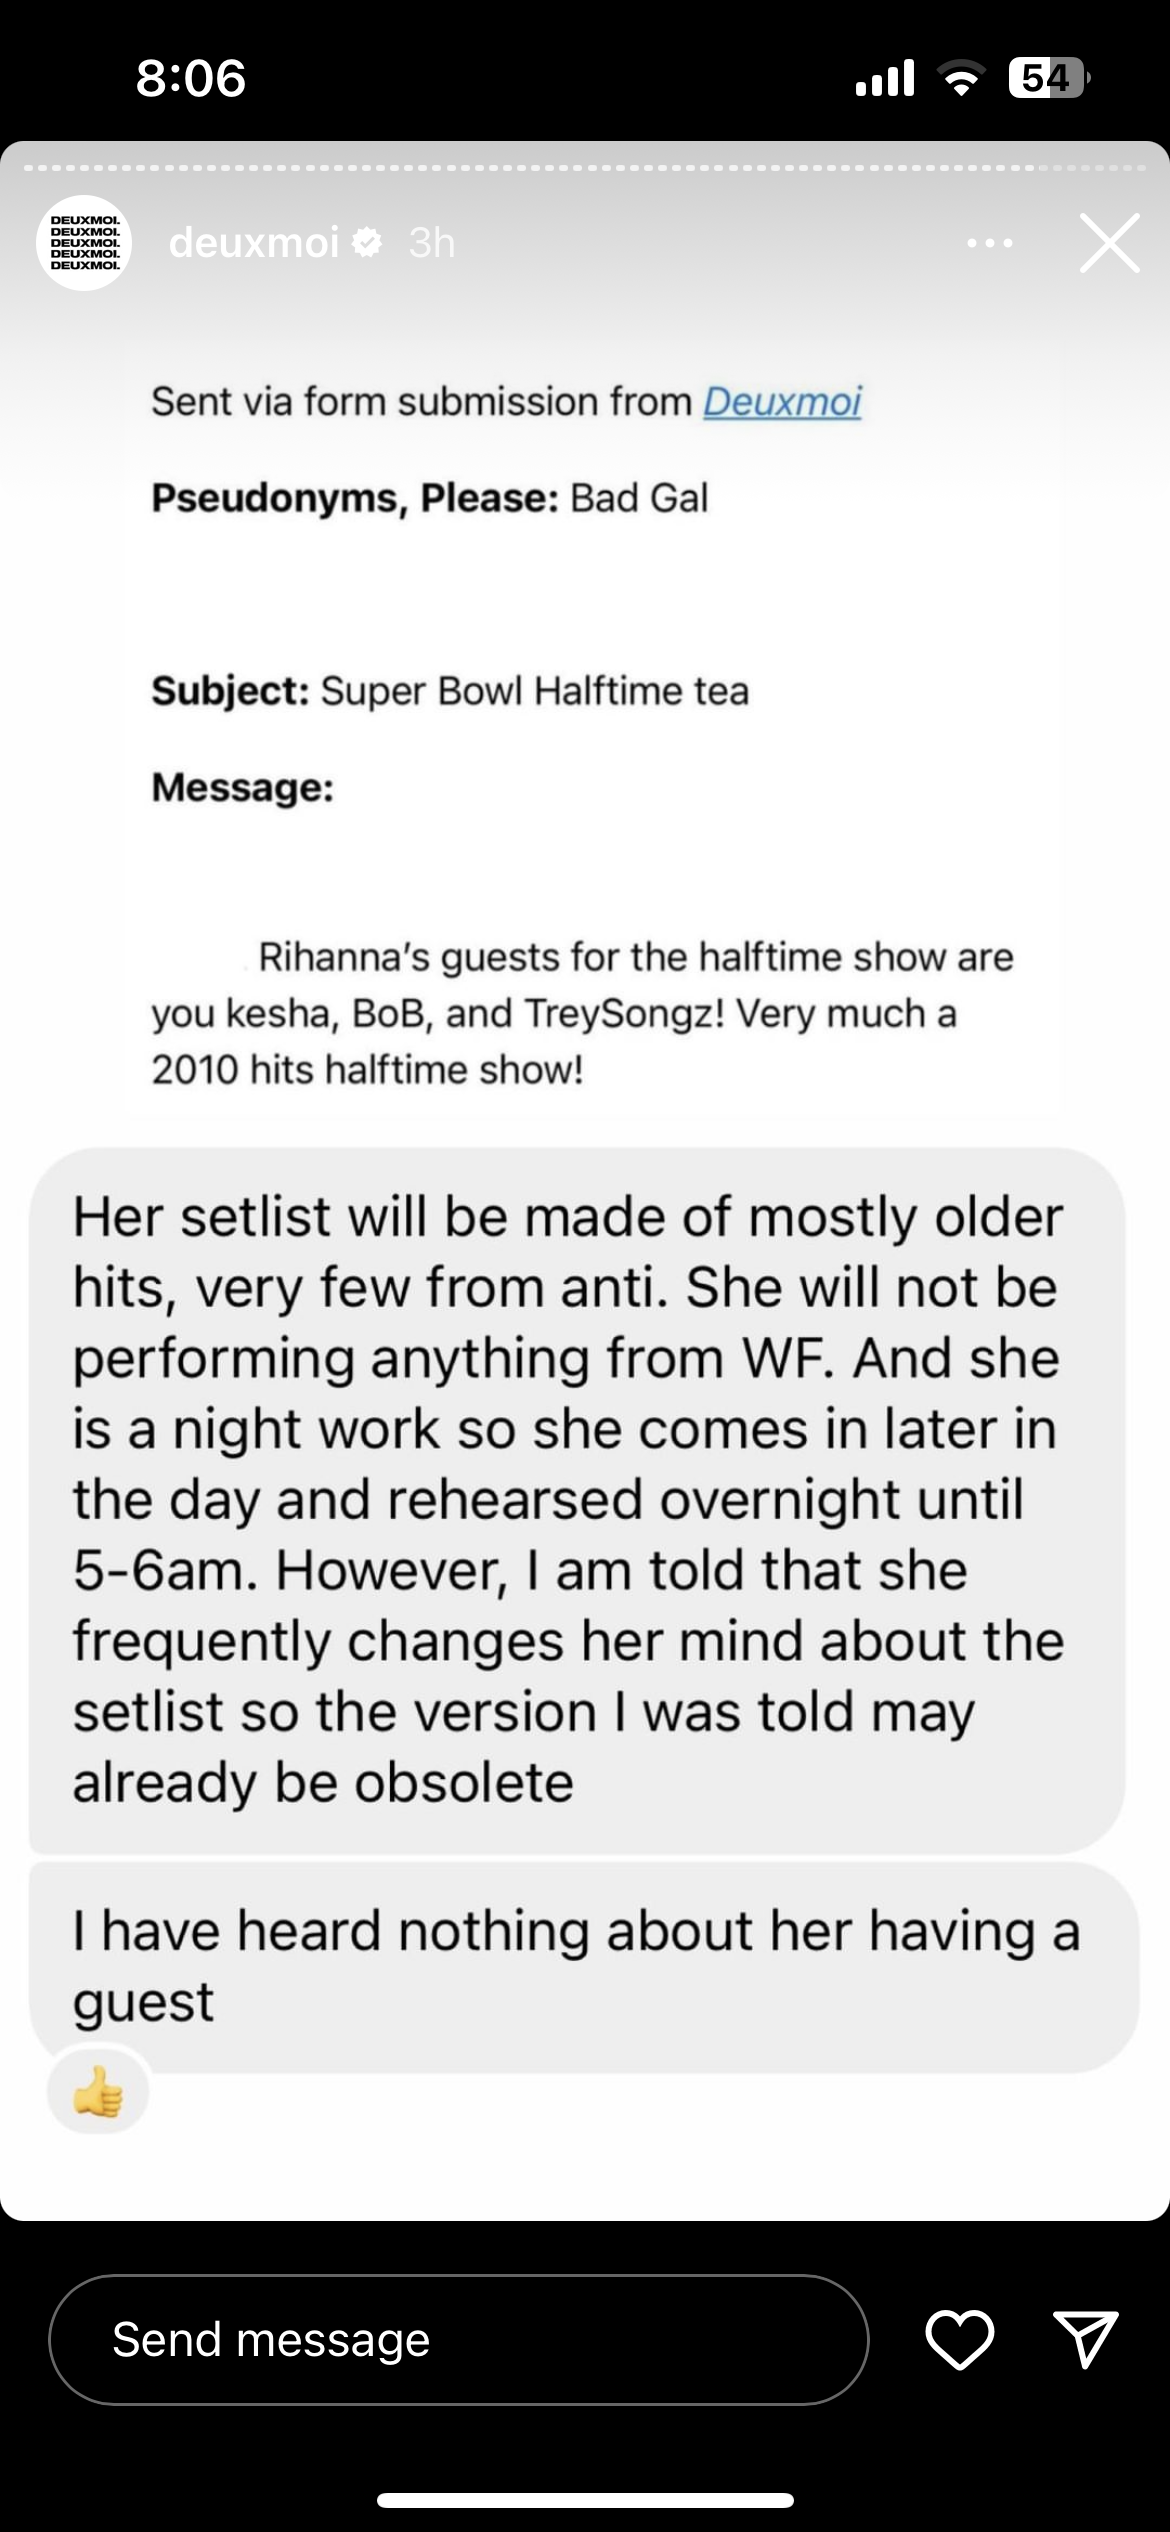 Deuxmoi's report on Rihanna's set list and guests.